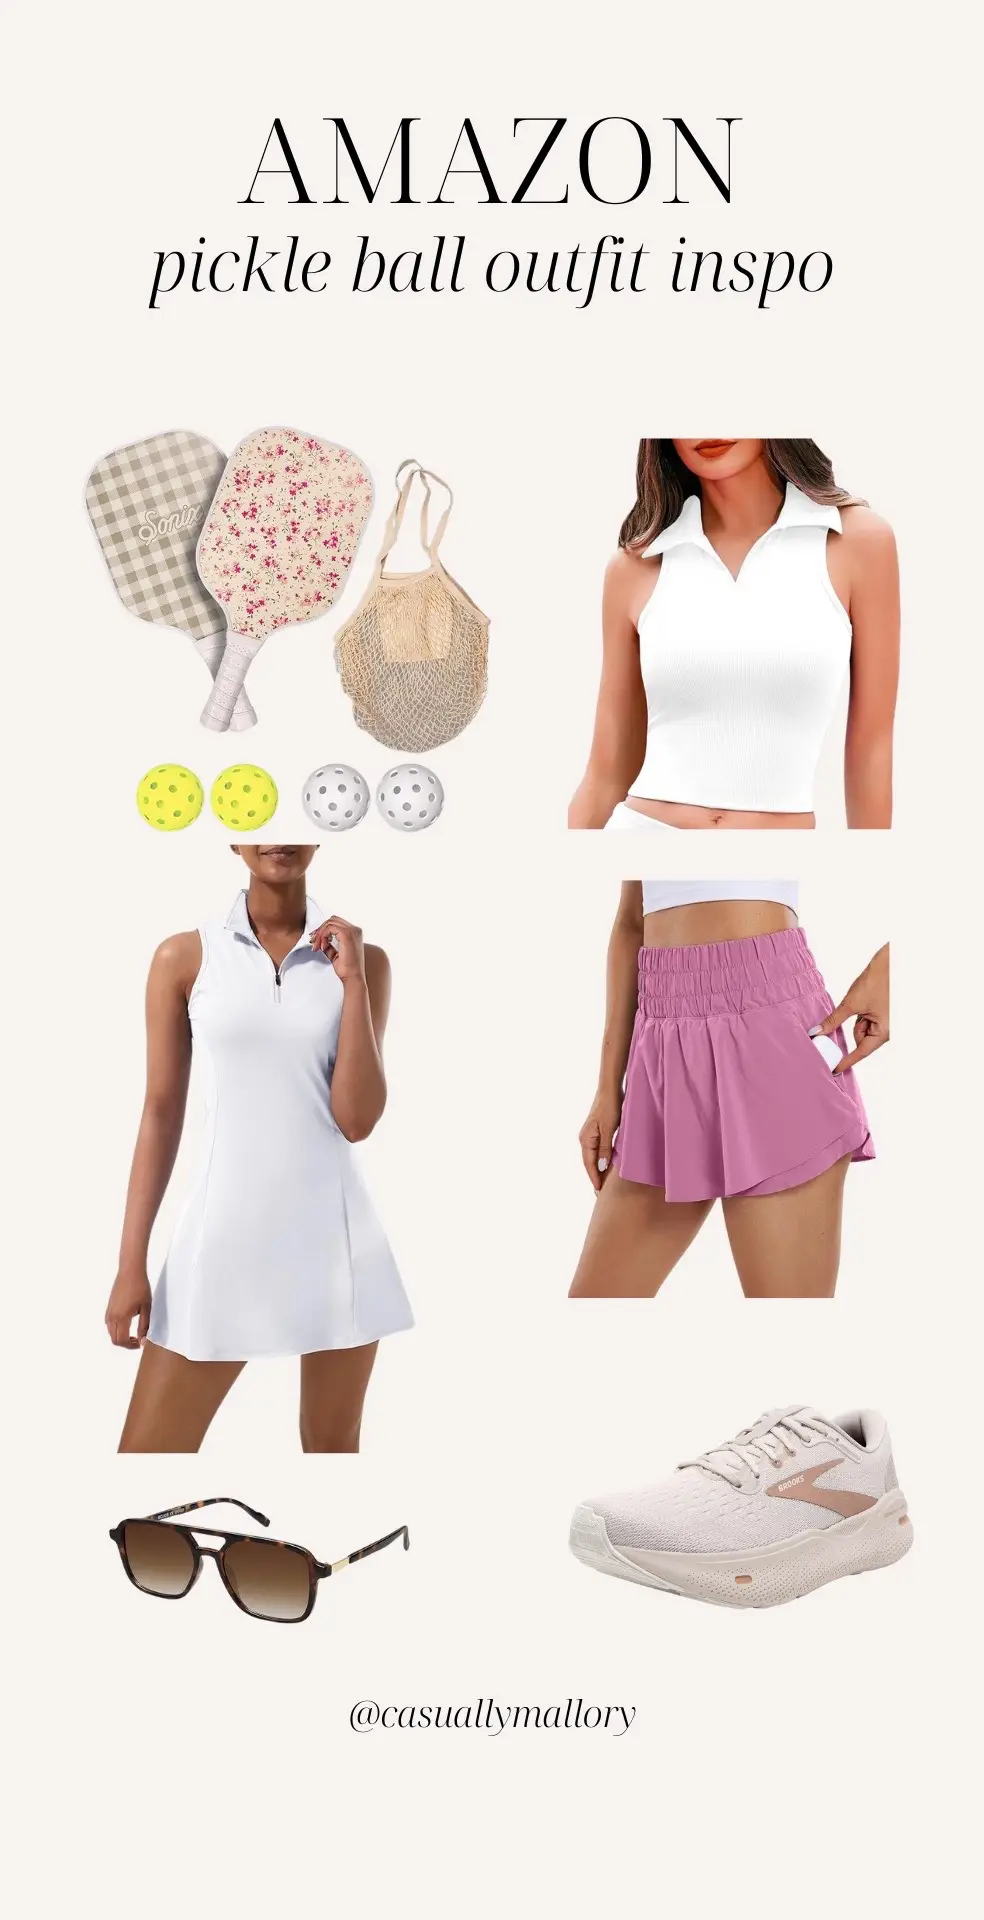 So many good finds & so many good deals 🥹 you can find all of these on my st0refr0nt under the “photos tab” 🤍 #amazonfinds #amazonfashion #outfitideas #pickleball #pickleballoutfit #summeroutfit #weddingguestdress #weddingguestoutfit #whattowear #europeansummer #amazonfavorites #amazonfashionfinds 